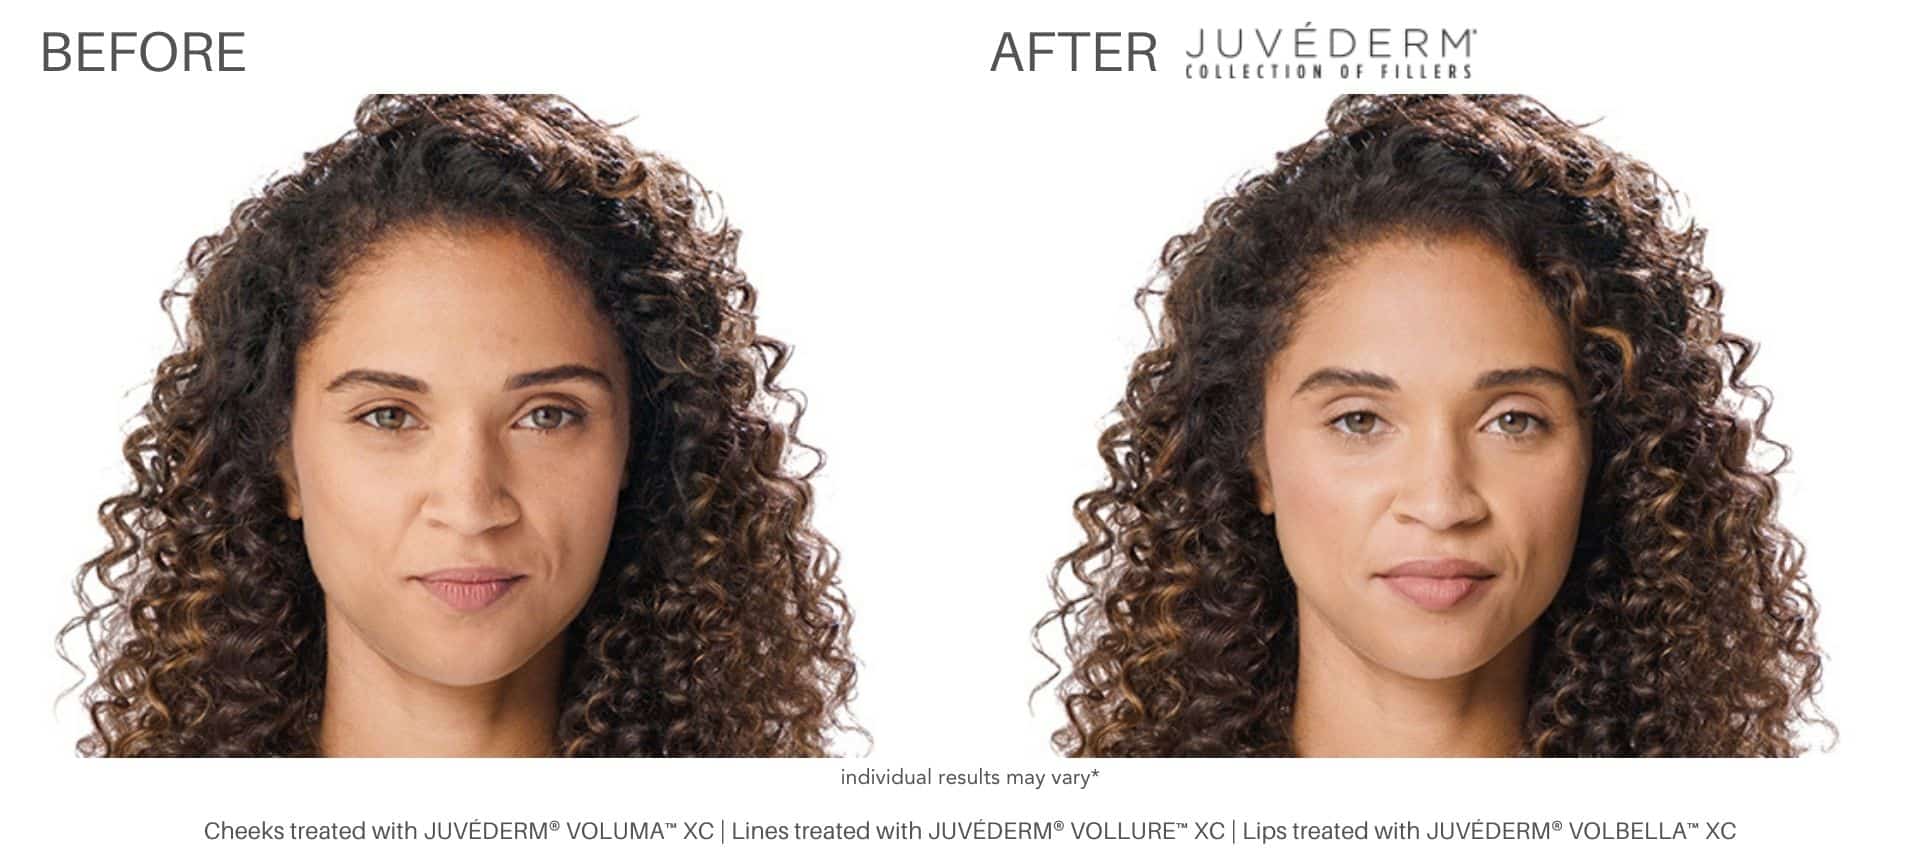 woman's before and after juvderm fillers from health first medical.